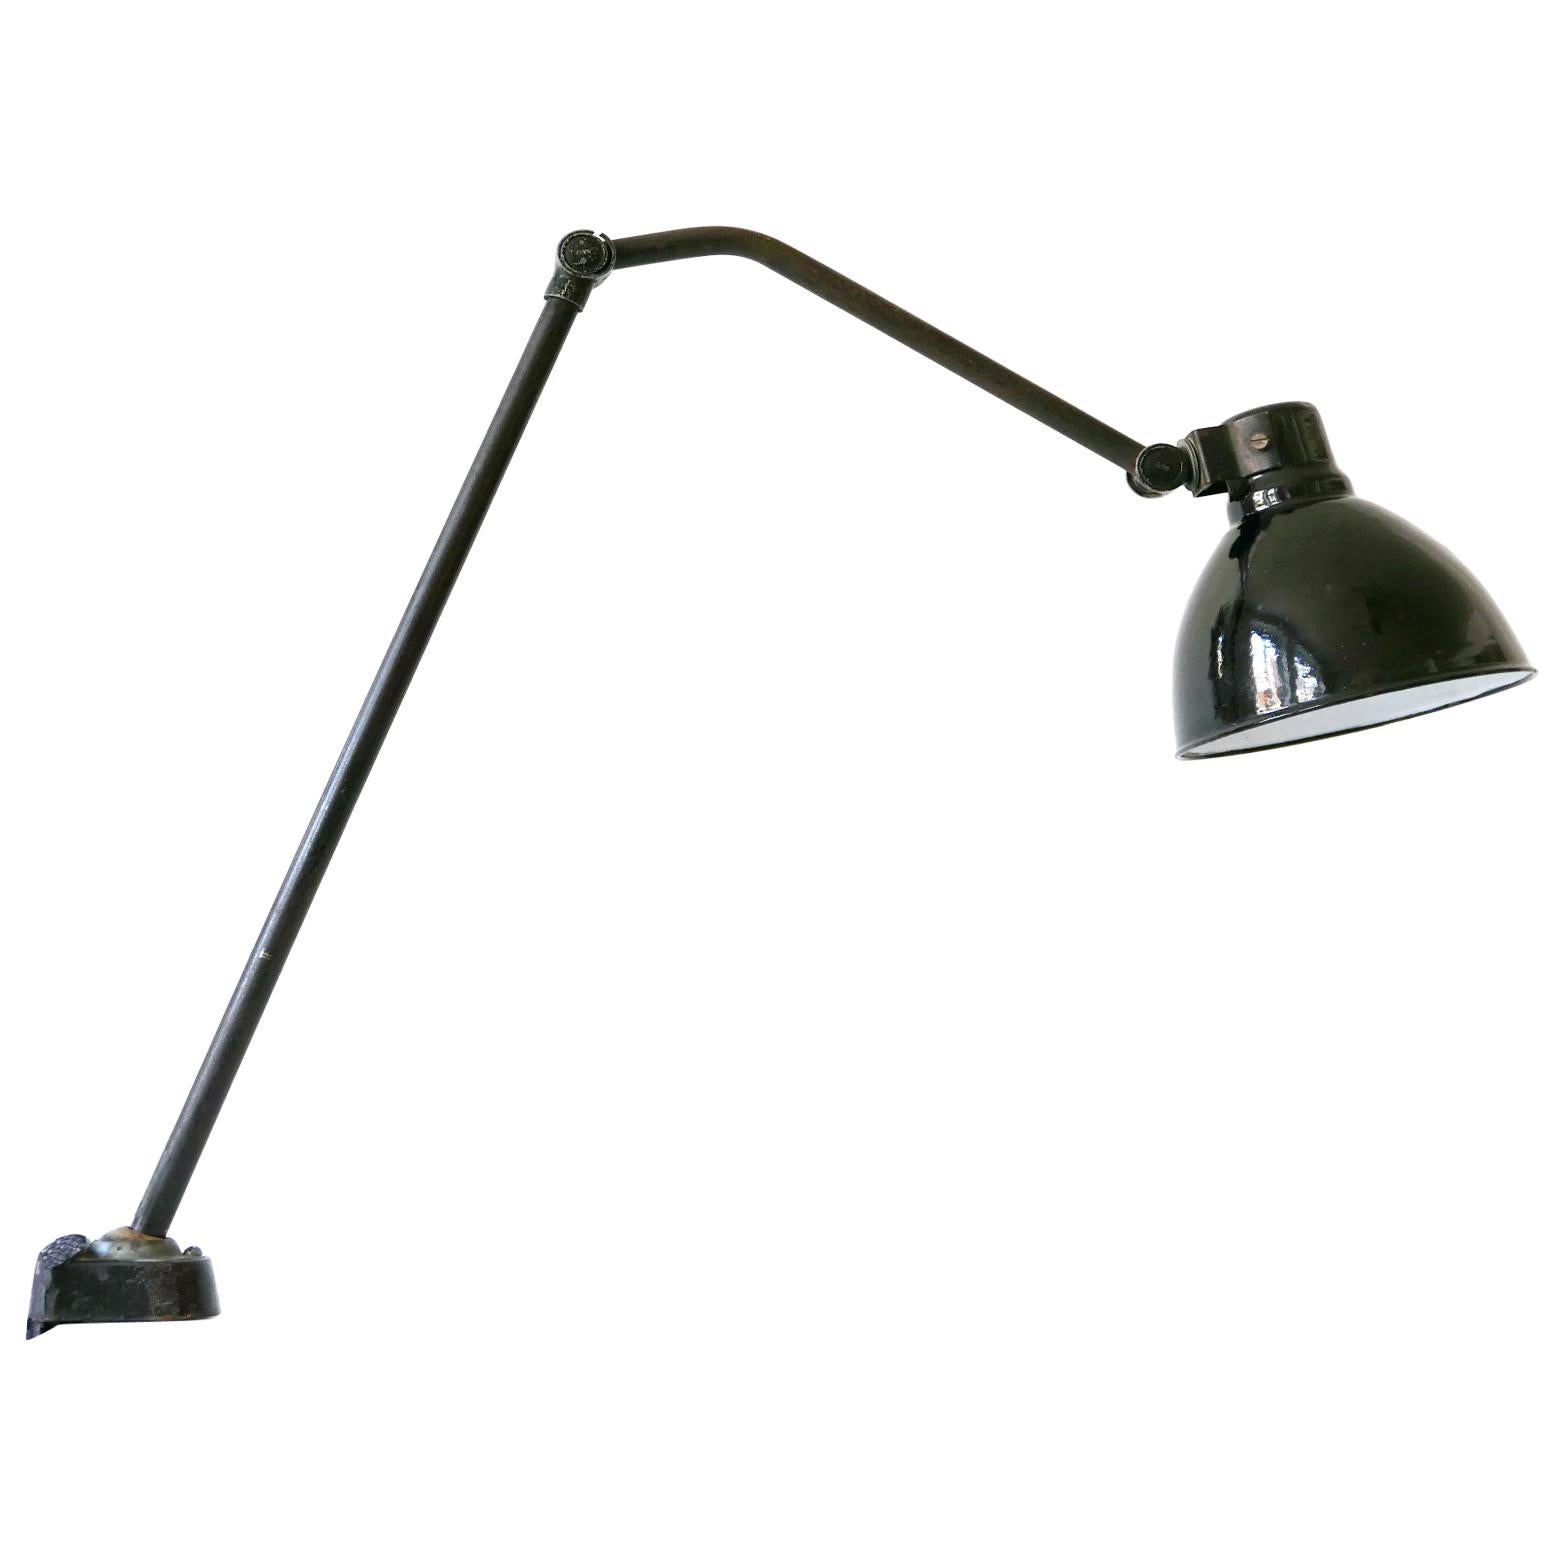 Bauhaus Task Lamp or Clamp Table Light by Peter Behrens for AEG 1920s, Germany